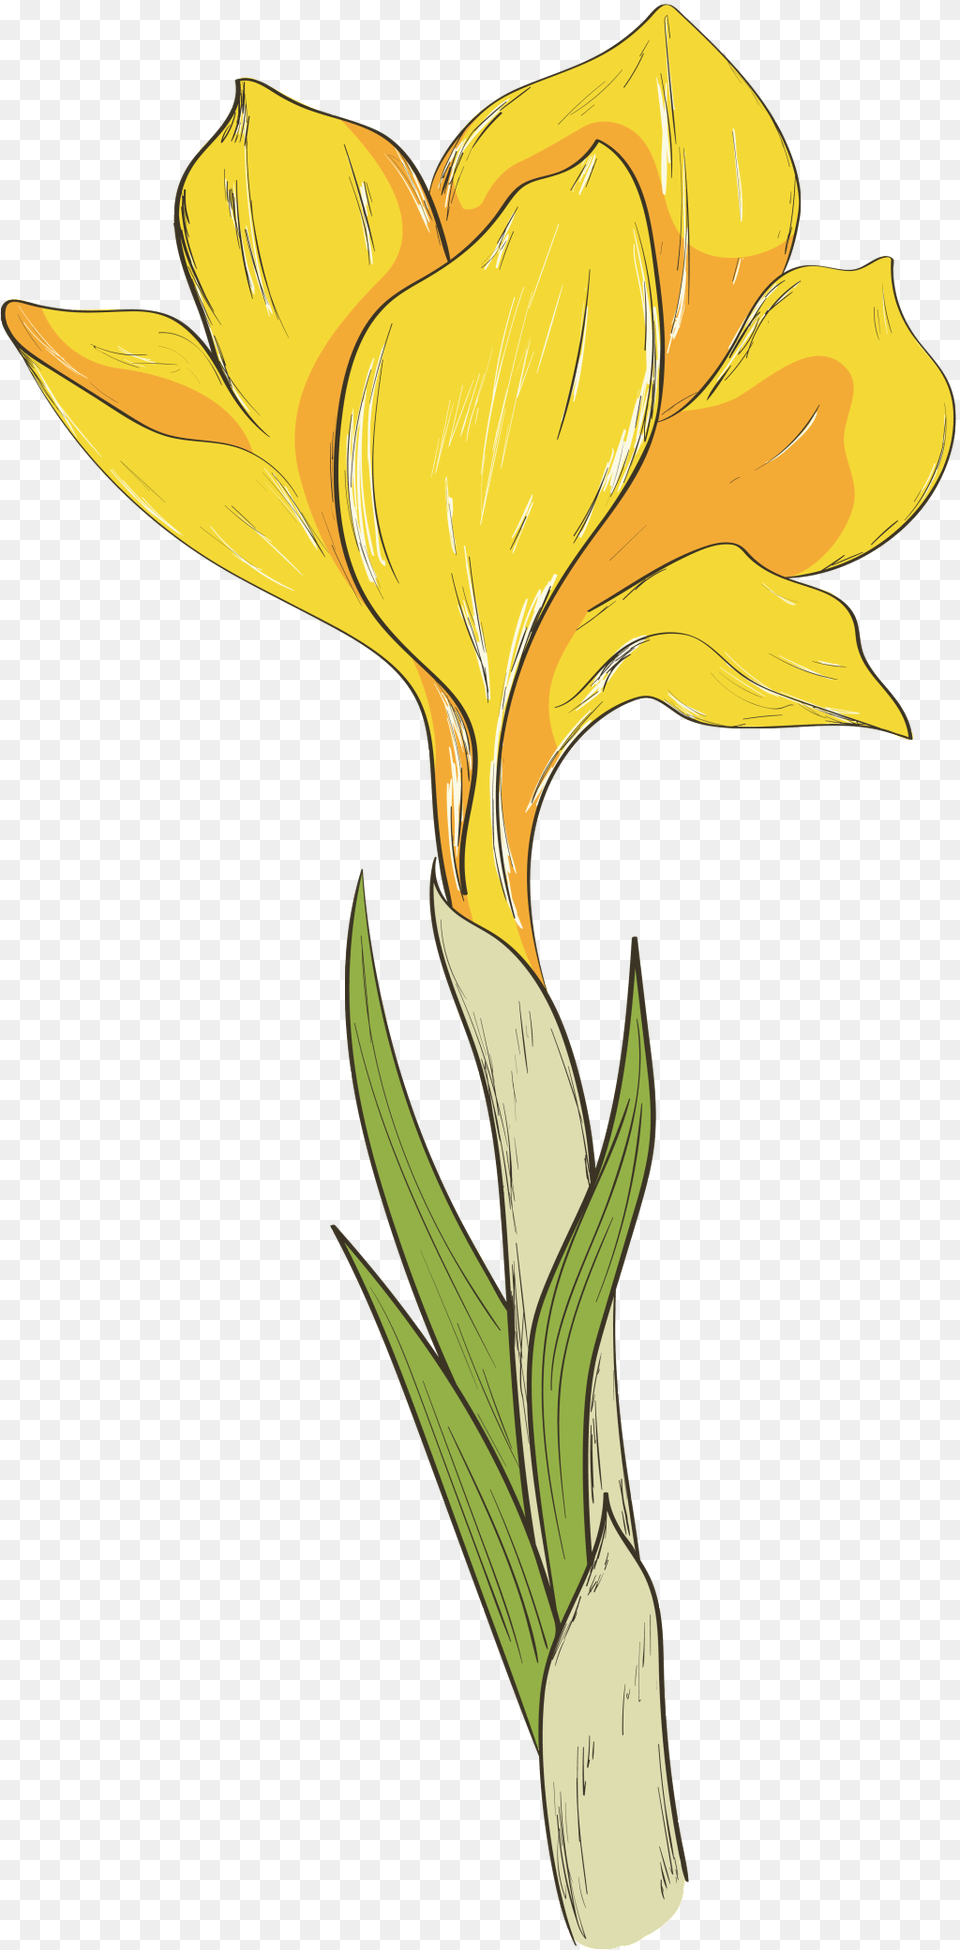 This Graphics Is Hand Drawn A Blooming Yellow Flower Portable Network Graphics, Daffodil, Petal, Plant, Cross Free Png Download